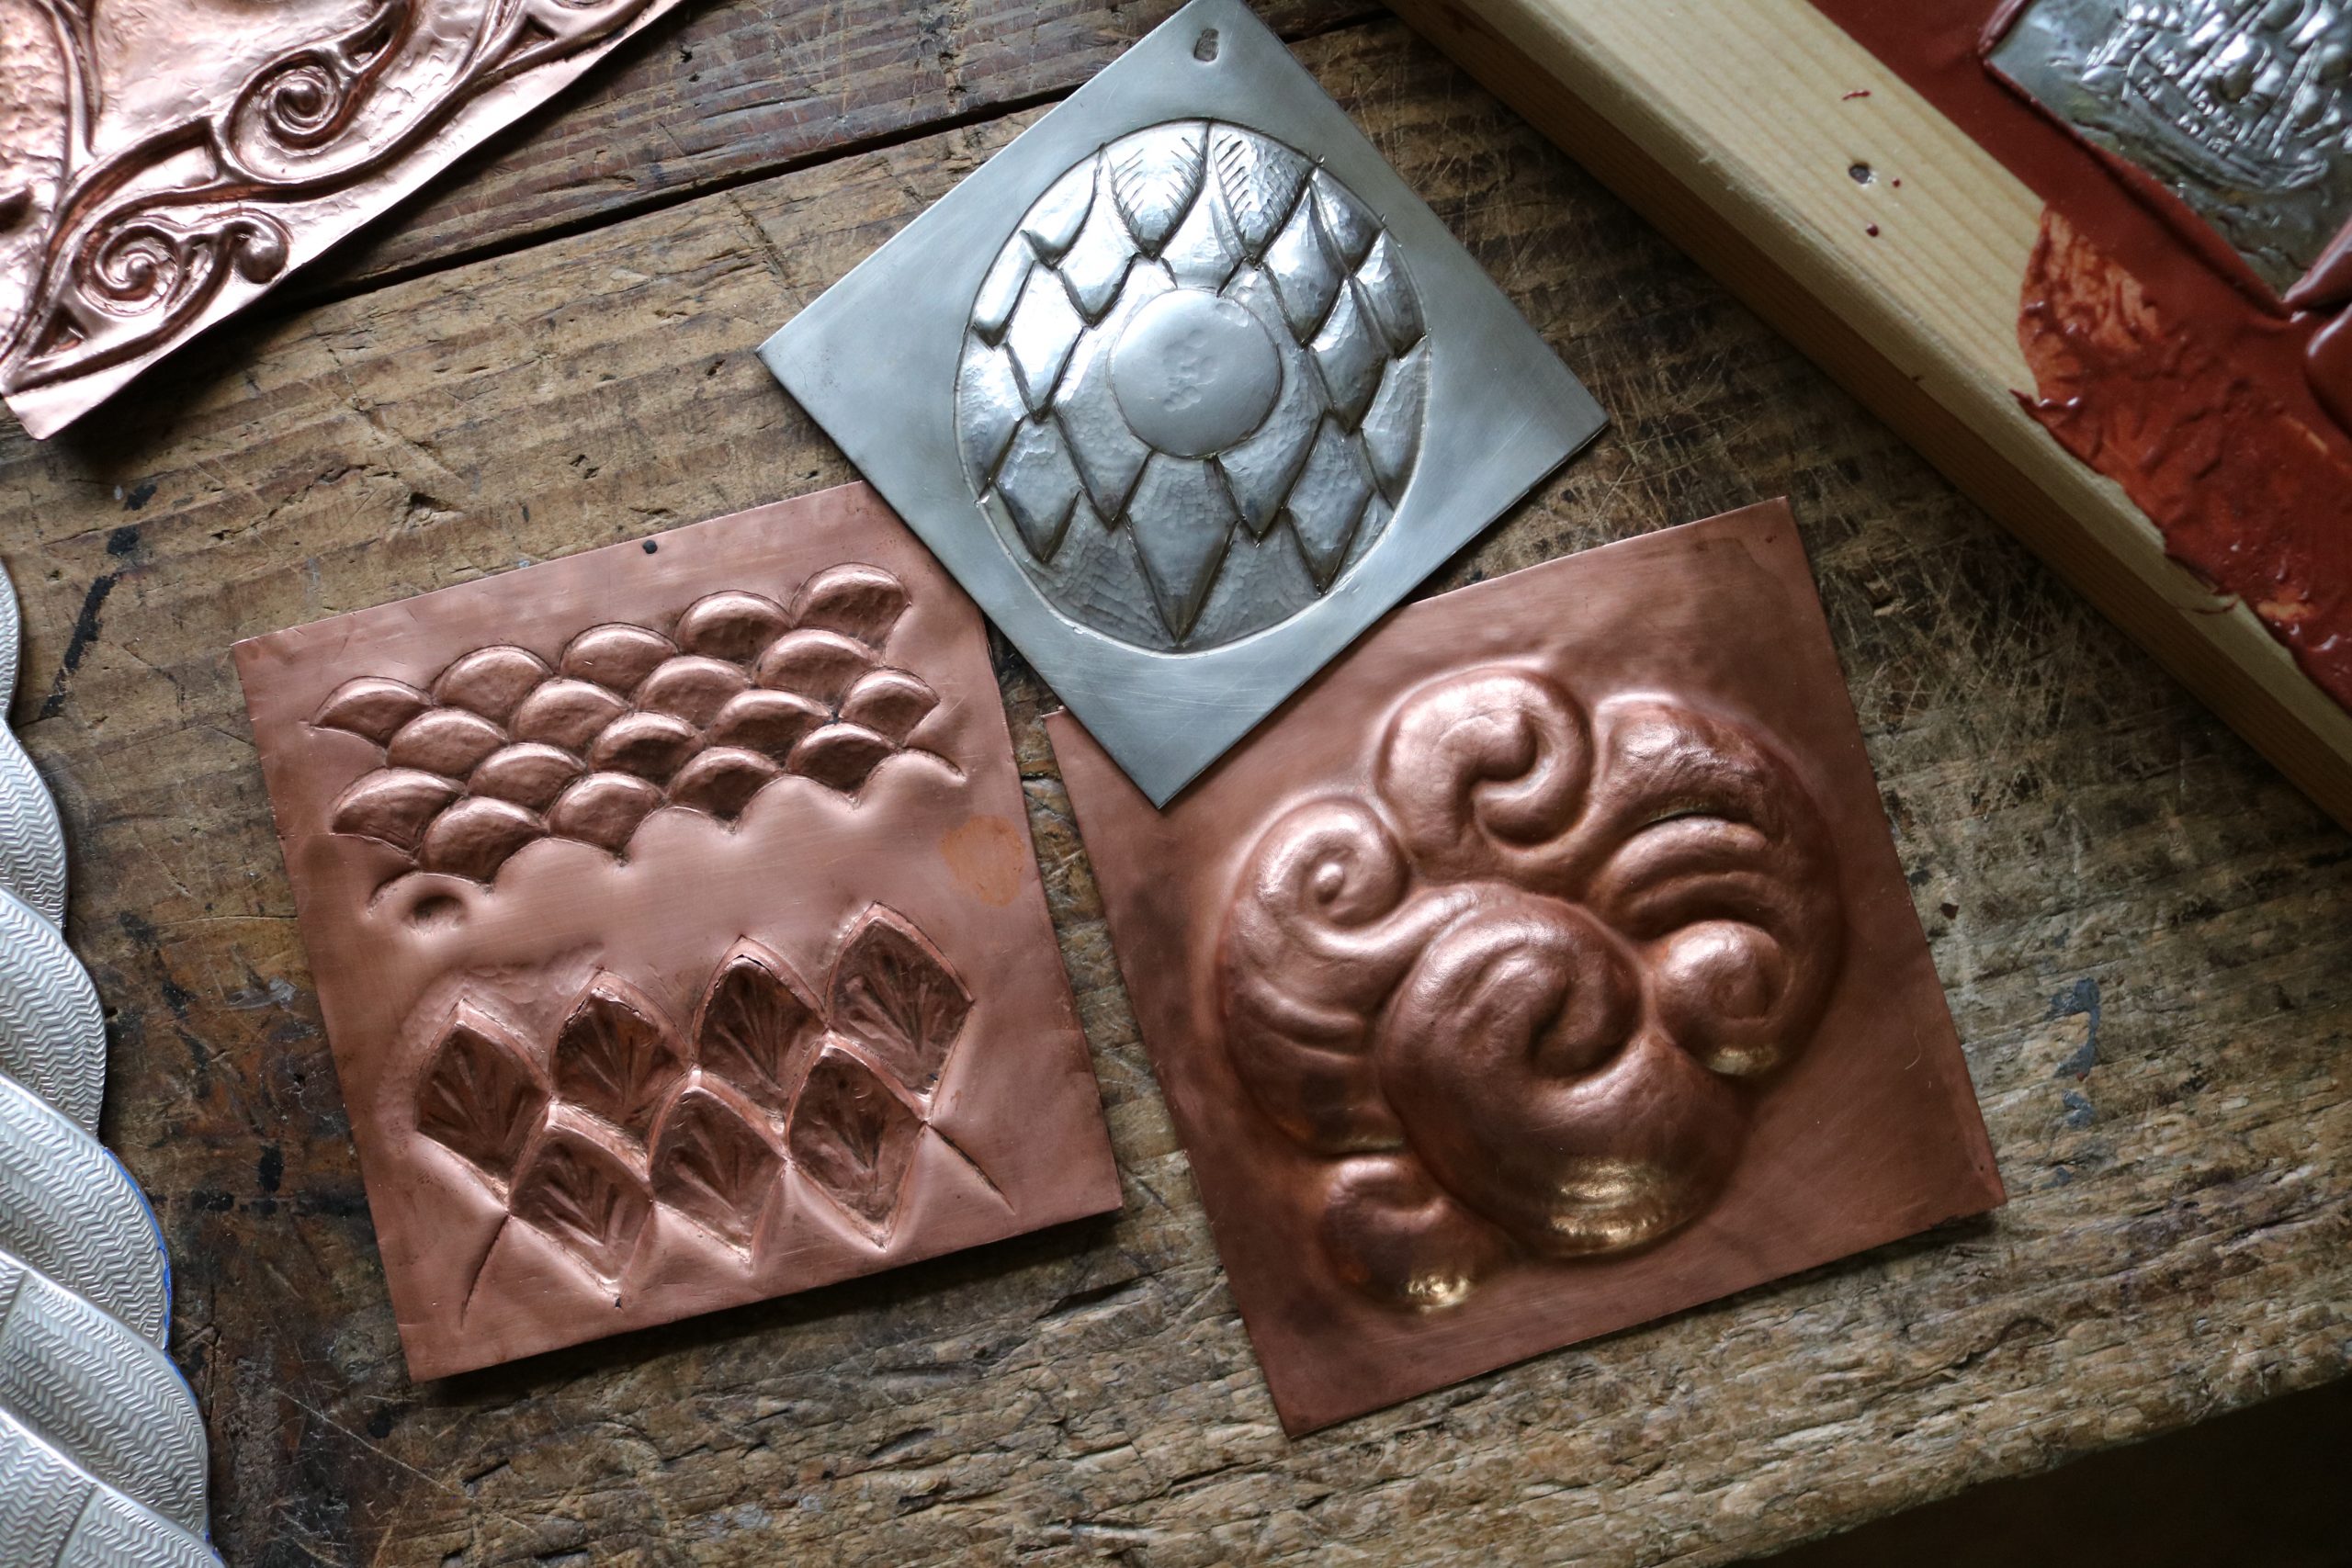 Repousse samples on copper and silver